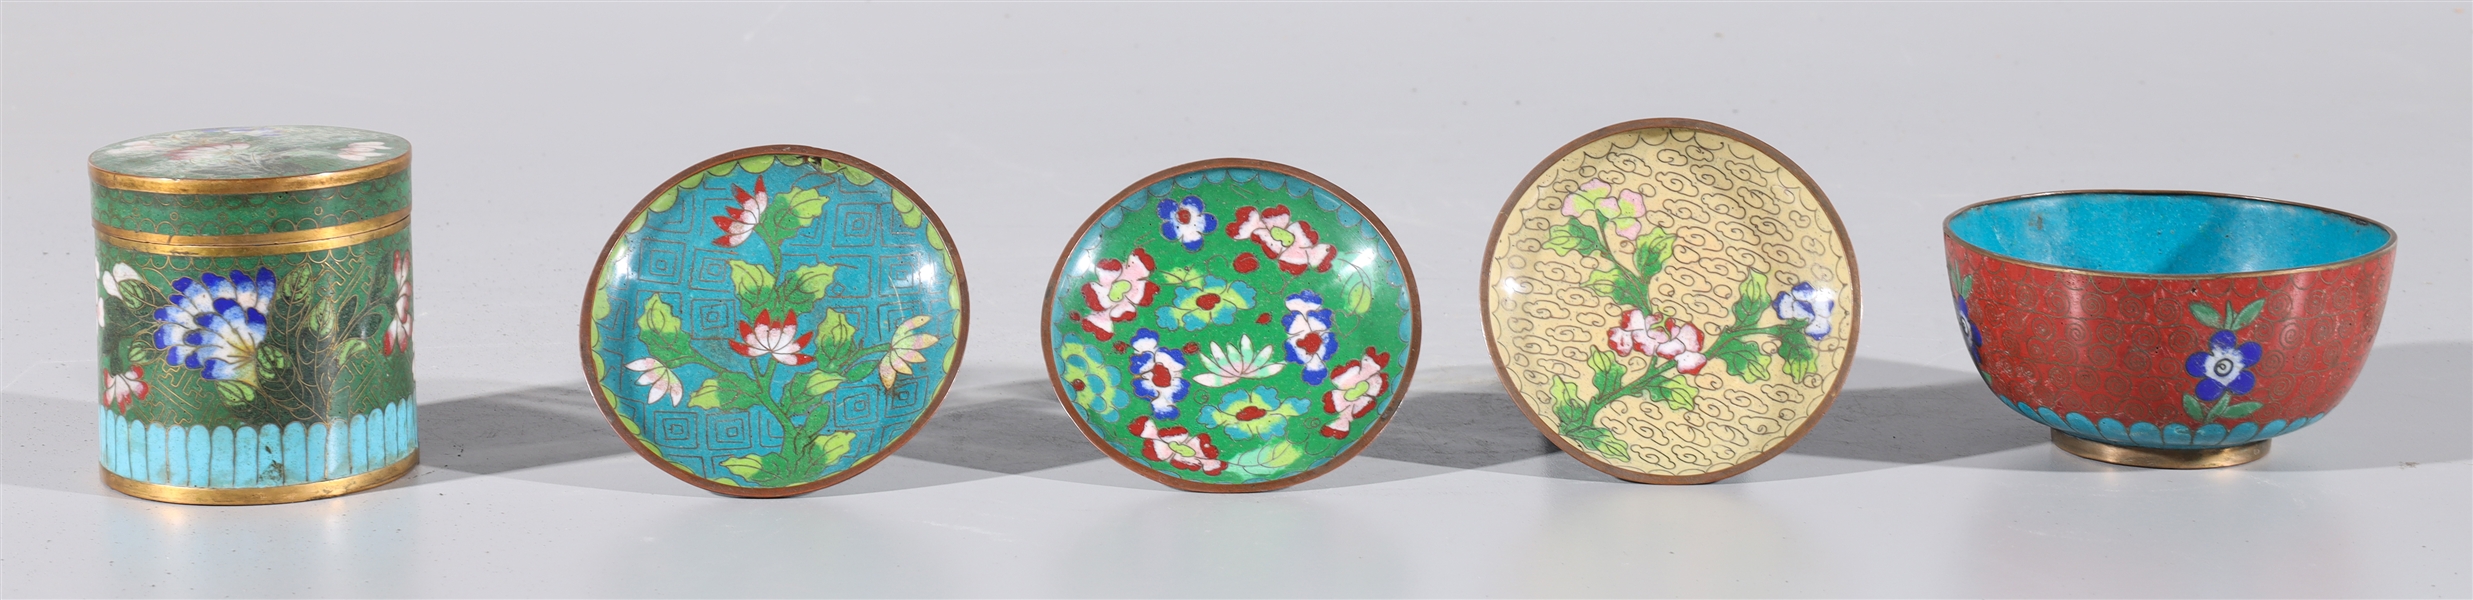 Group of five antique Chinese cloisonne